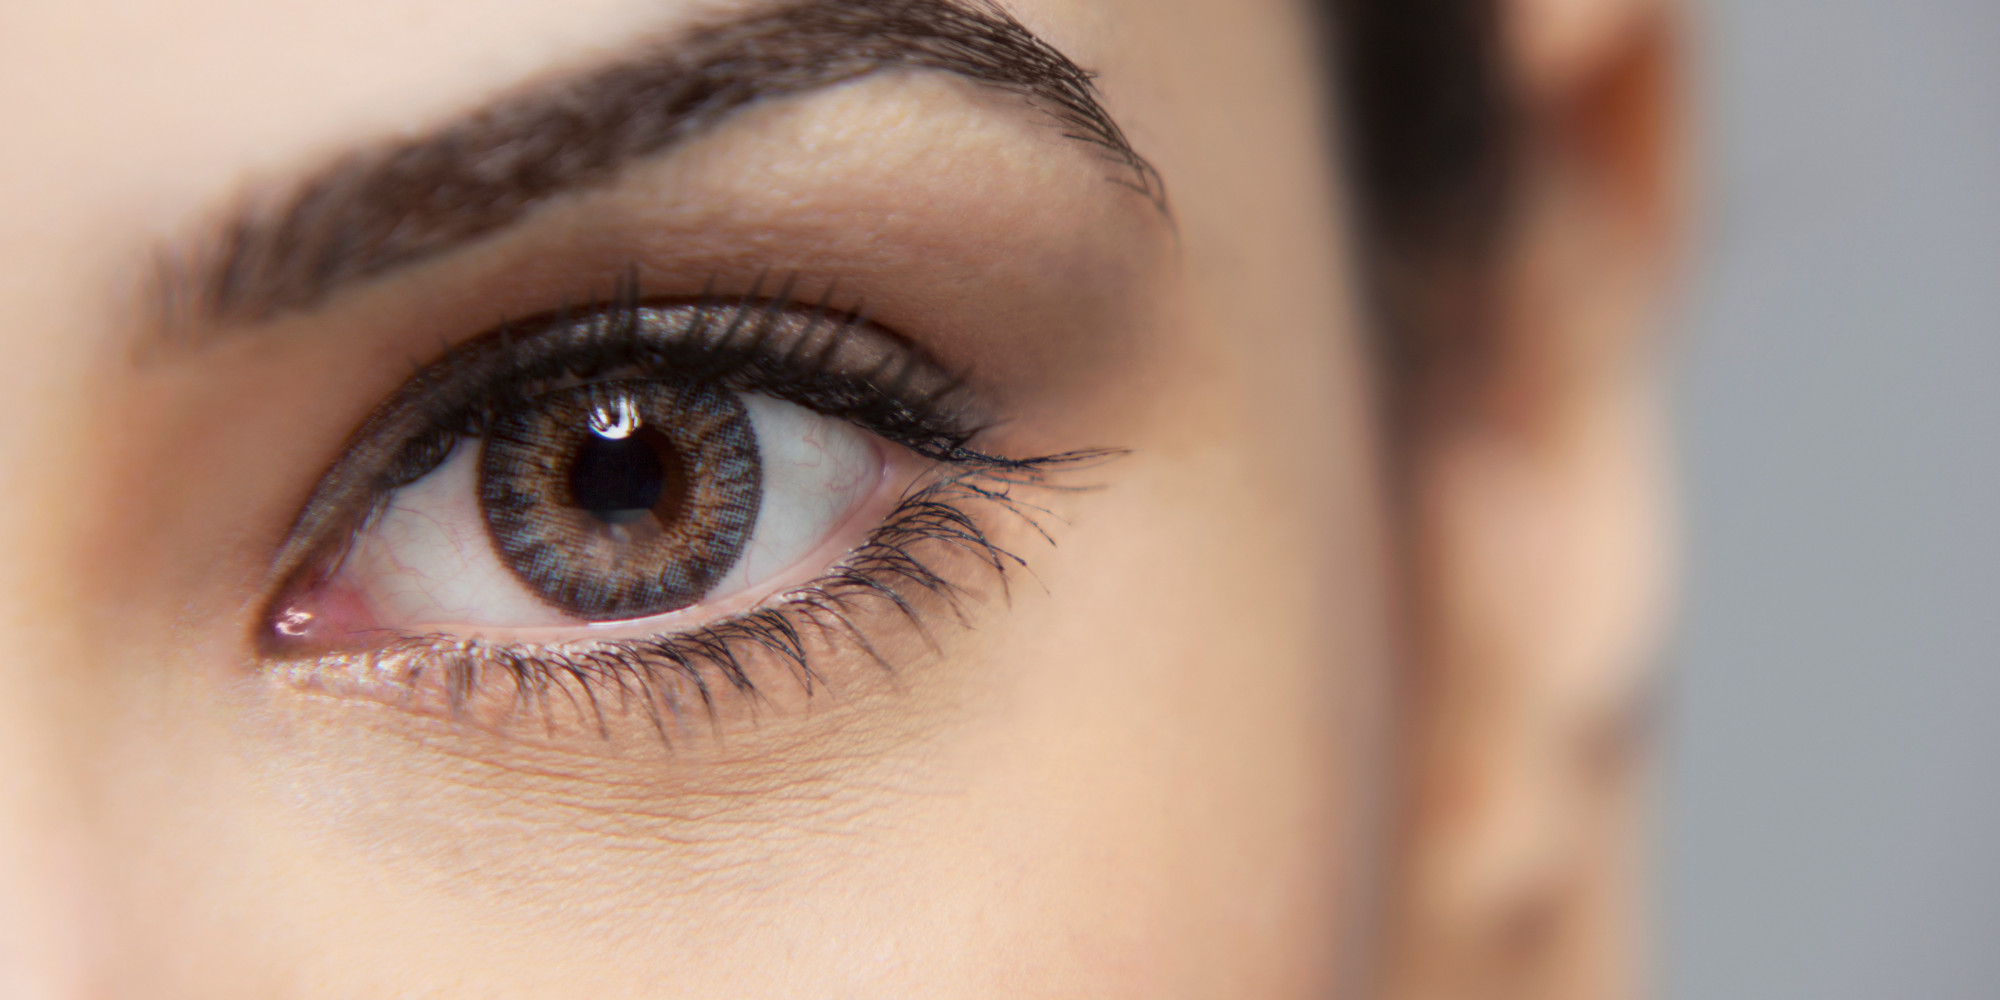 20 Things You Probably Didn't Know About Your Eyes | HuffPost